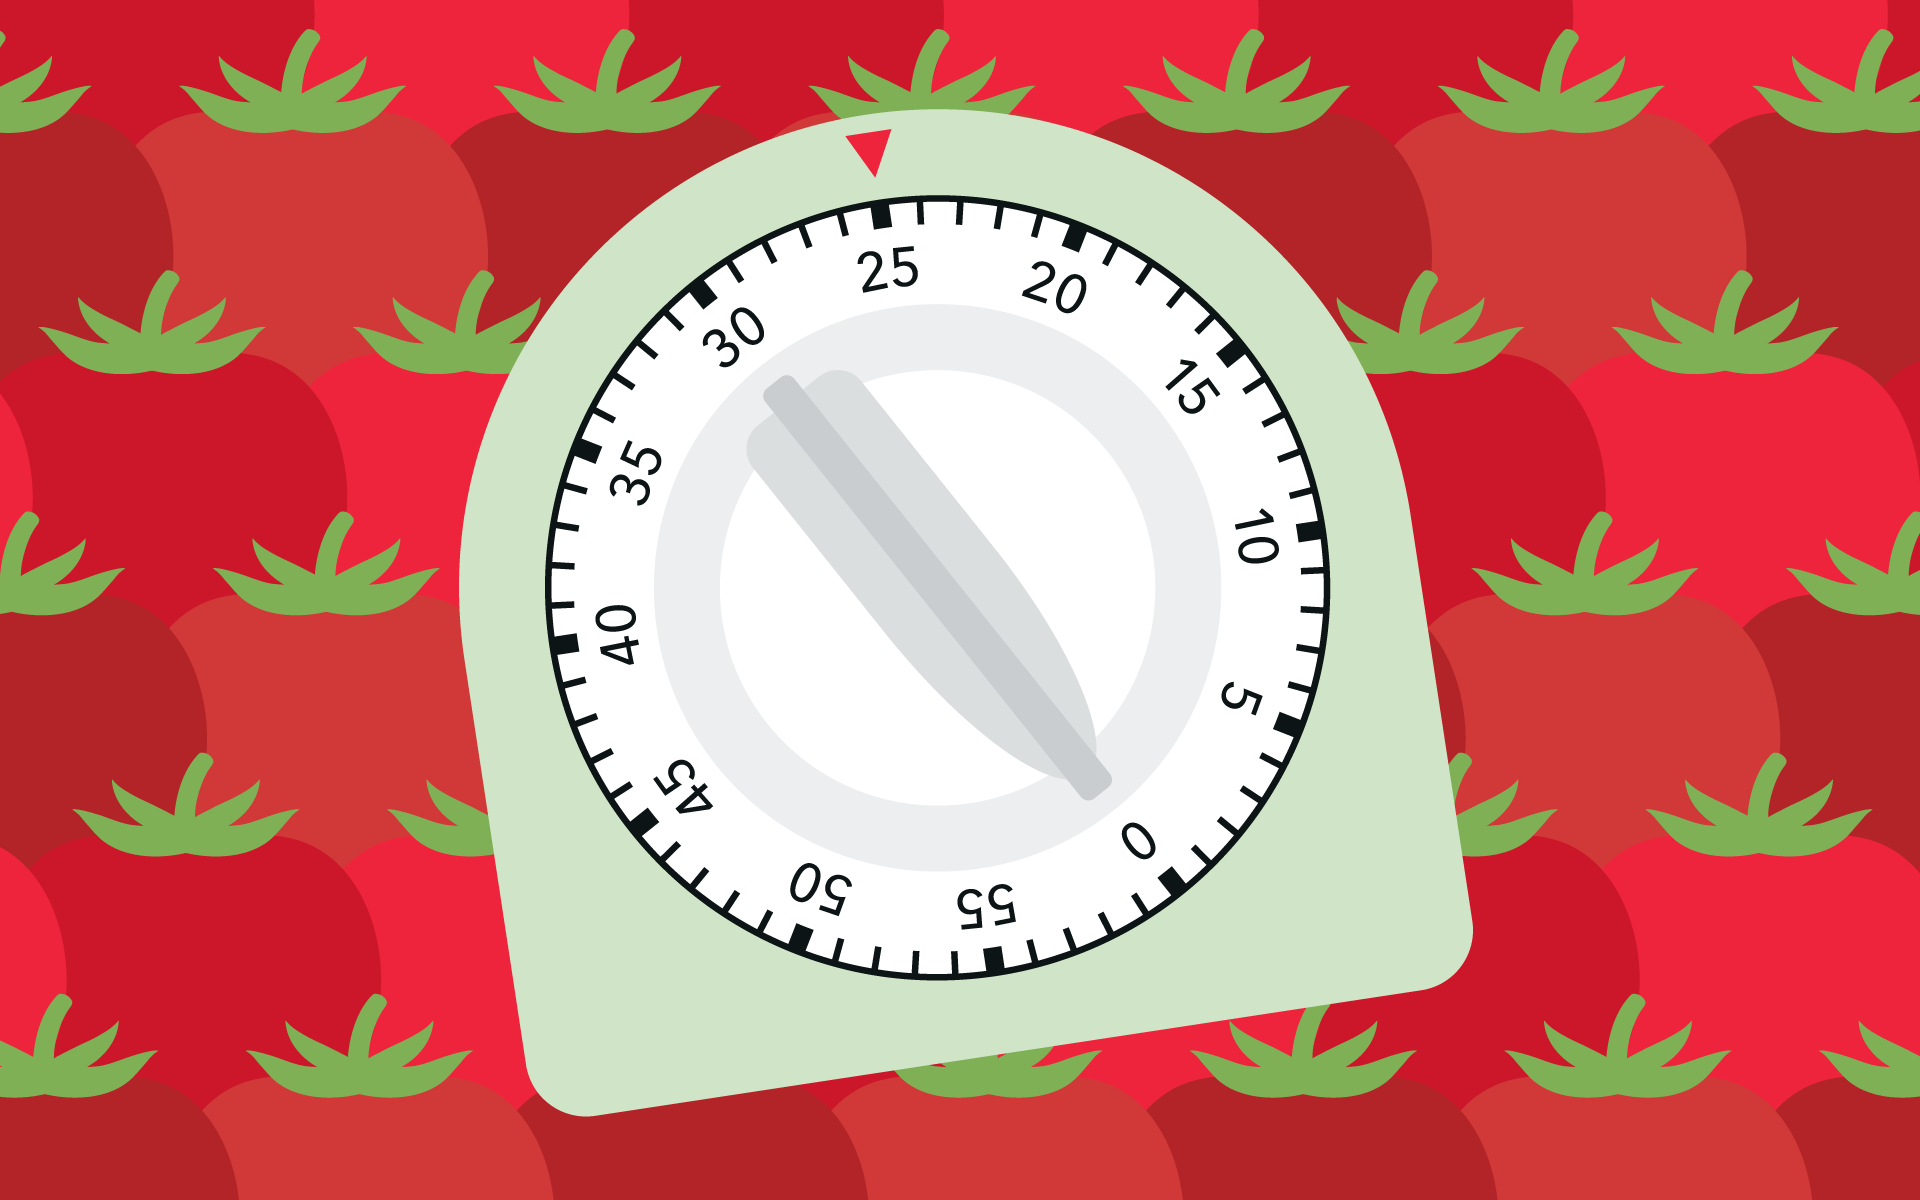 The Pomodoro Technique: You Can Tackle Any Task 25 Minutes at a Time